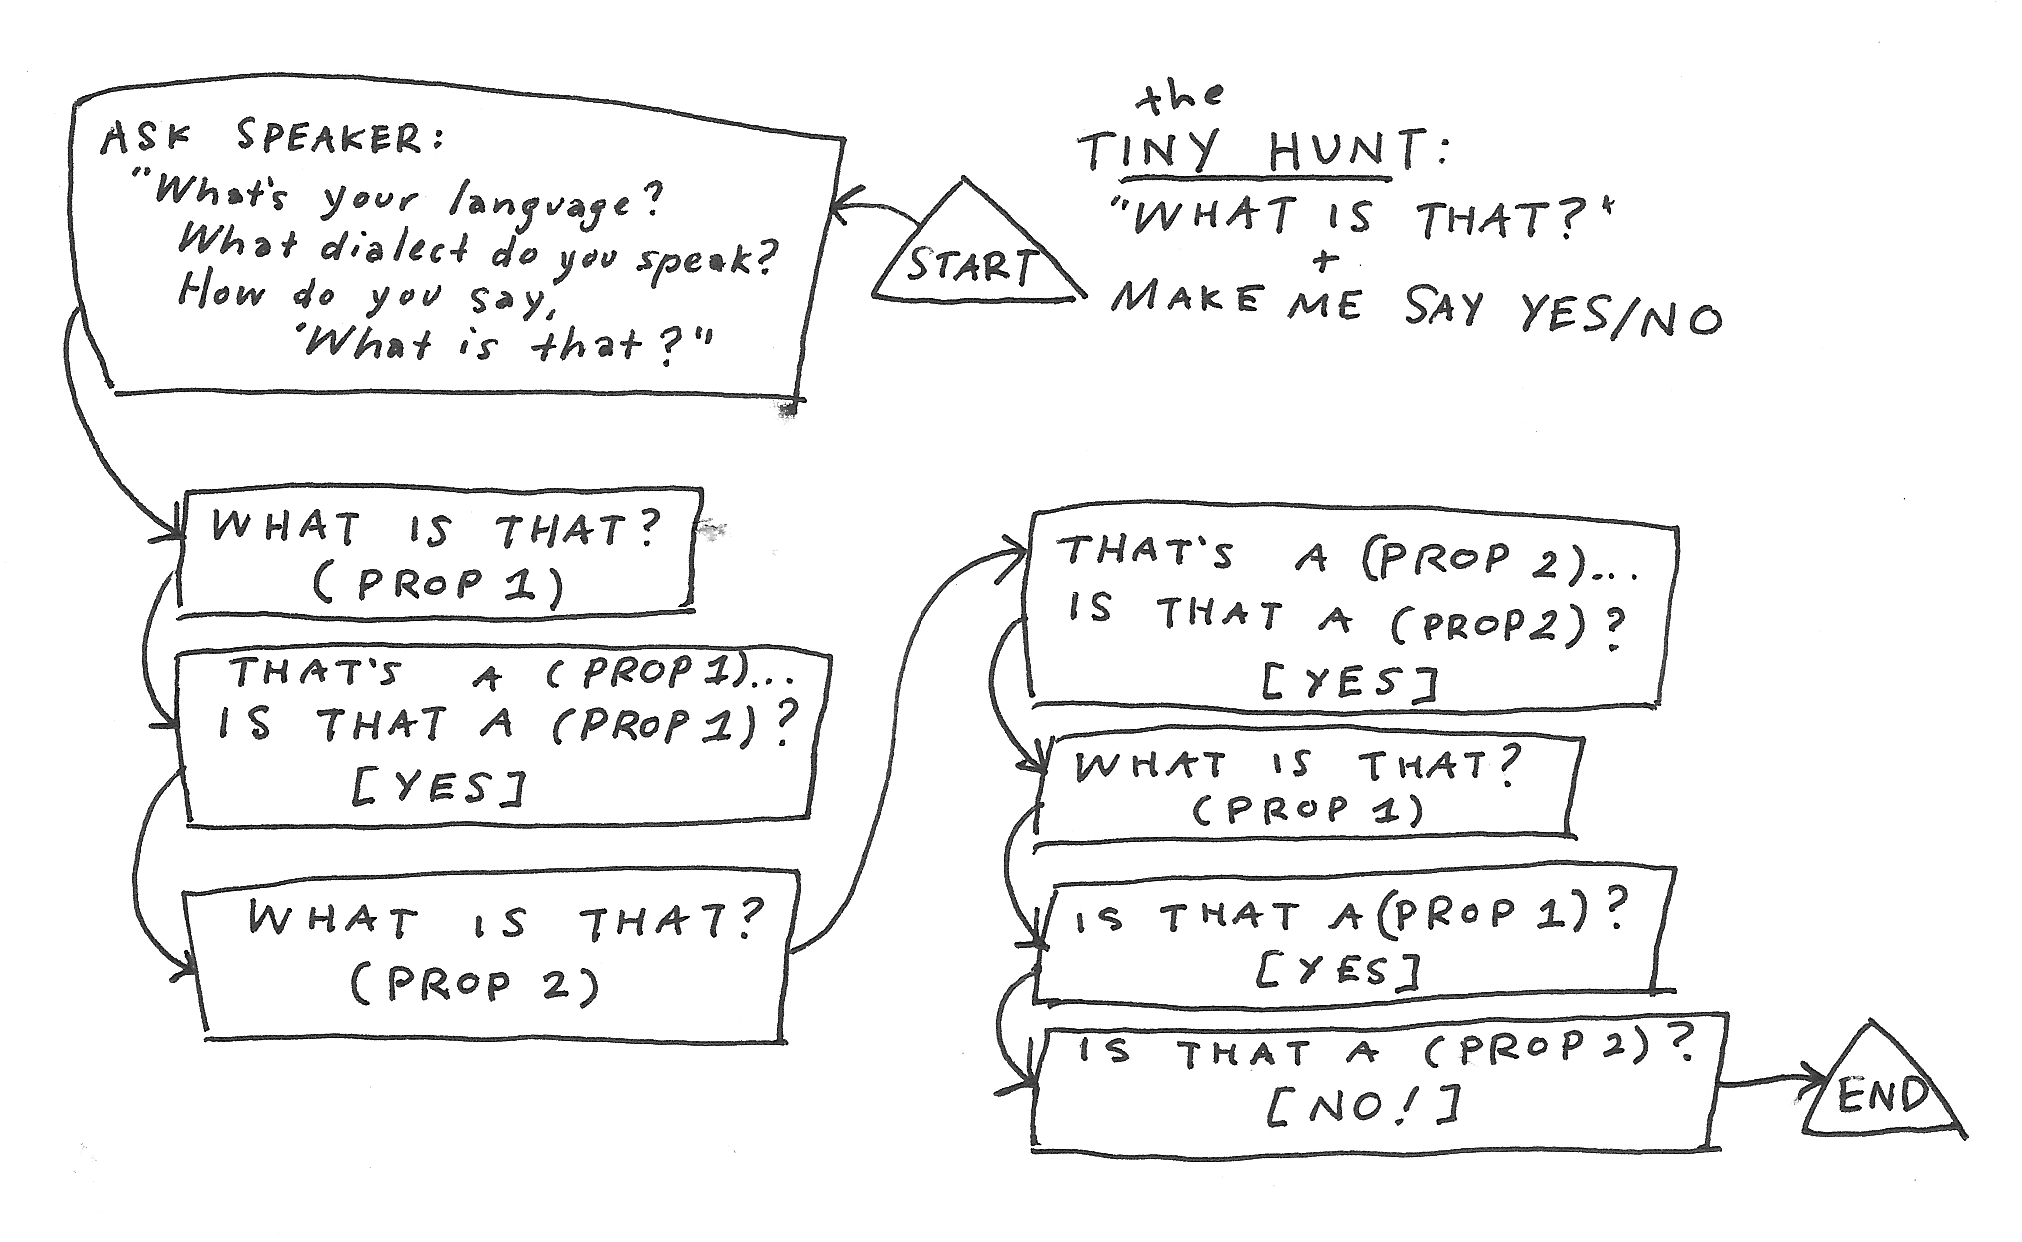 Flowchart above for playing through a Tiny Hunt with a fluent speaker - note that this diagram only shows the HUNTER's questions and statements, not the responses of the FLUENT FOOL.